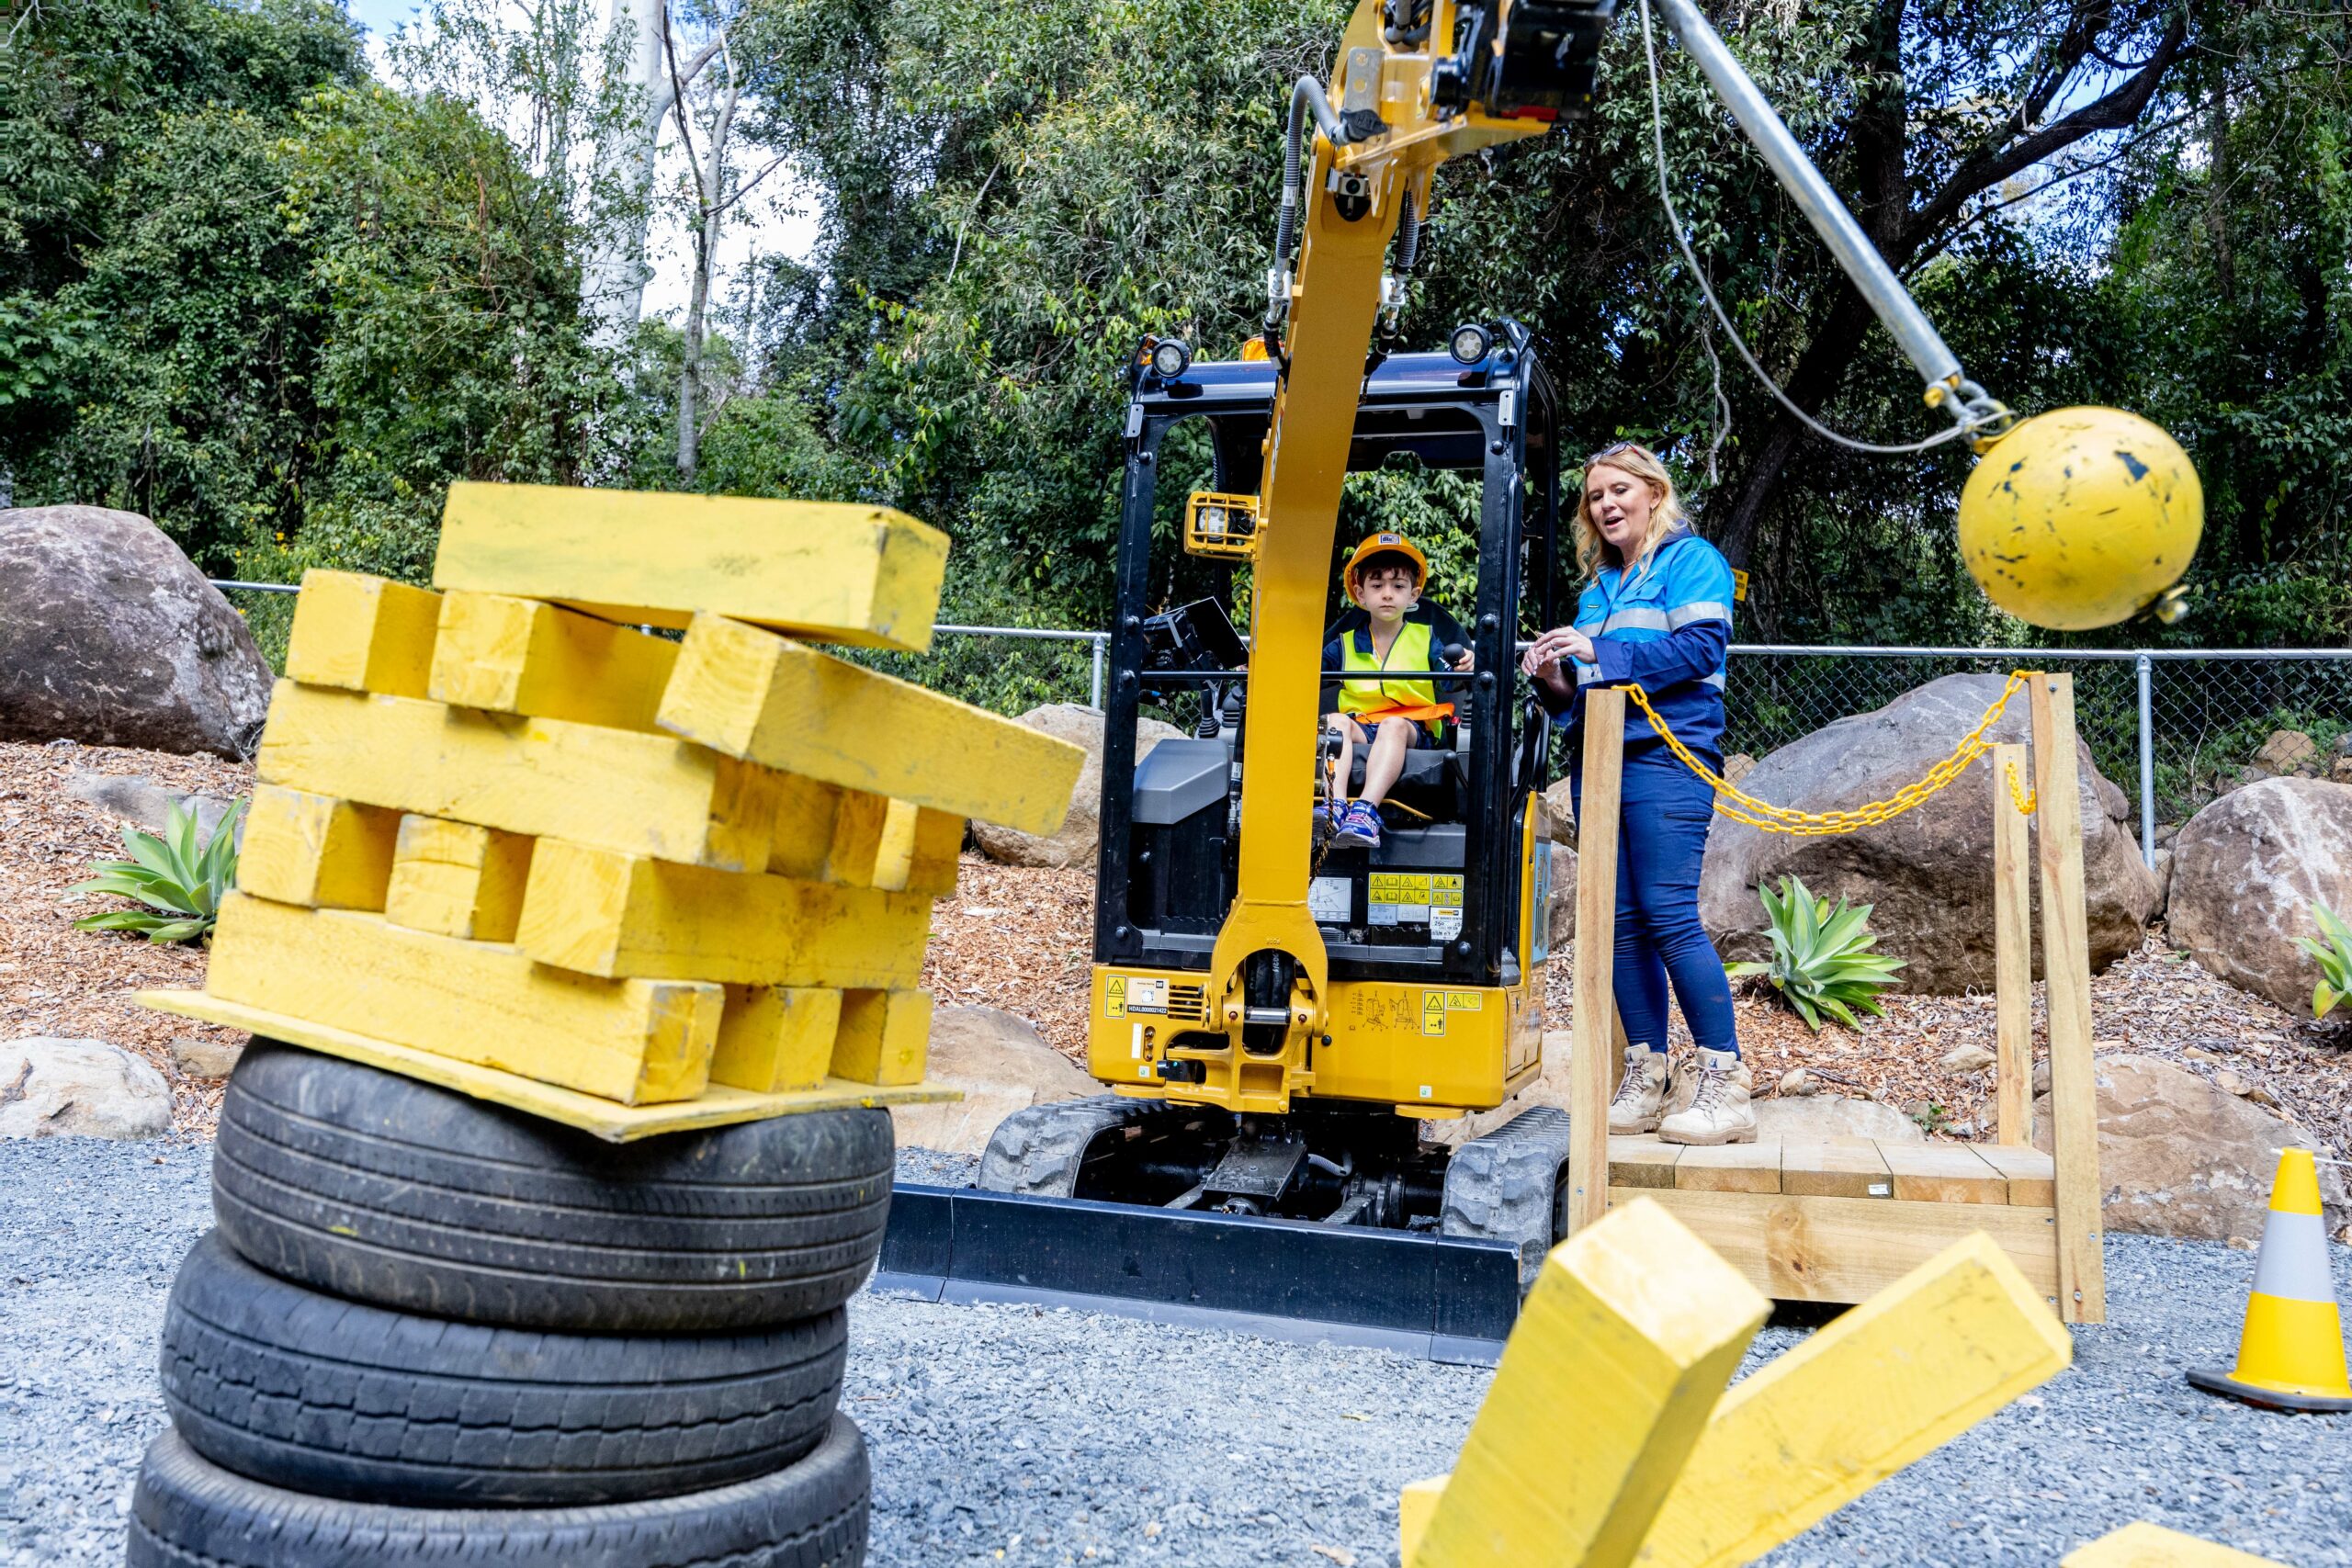 Australia’s first mini excavator park for kids is NOW OPEN and it’s the best, dirtiest fun ever!